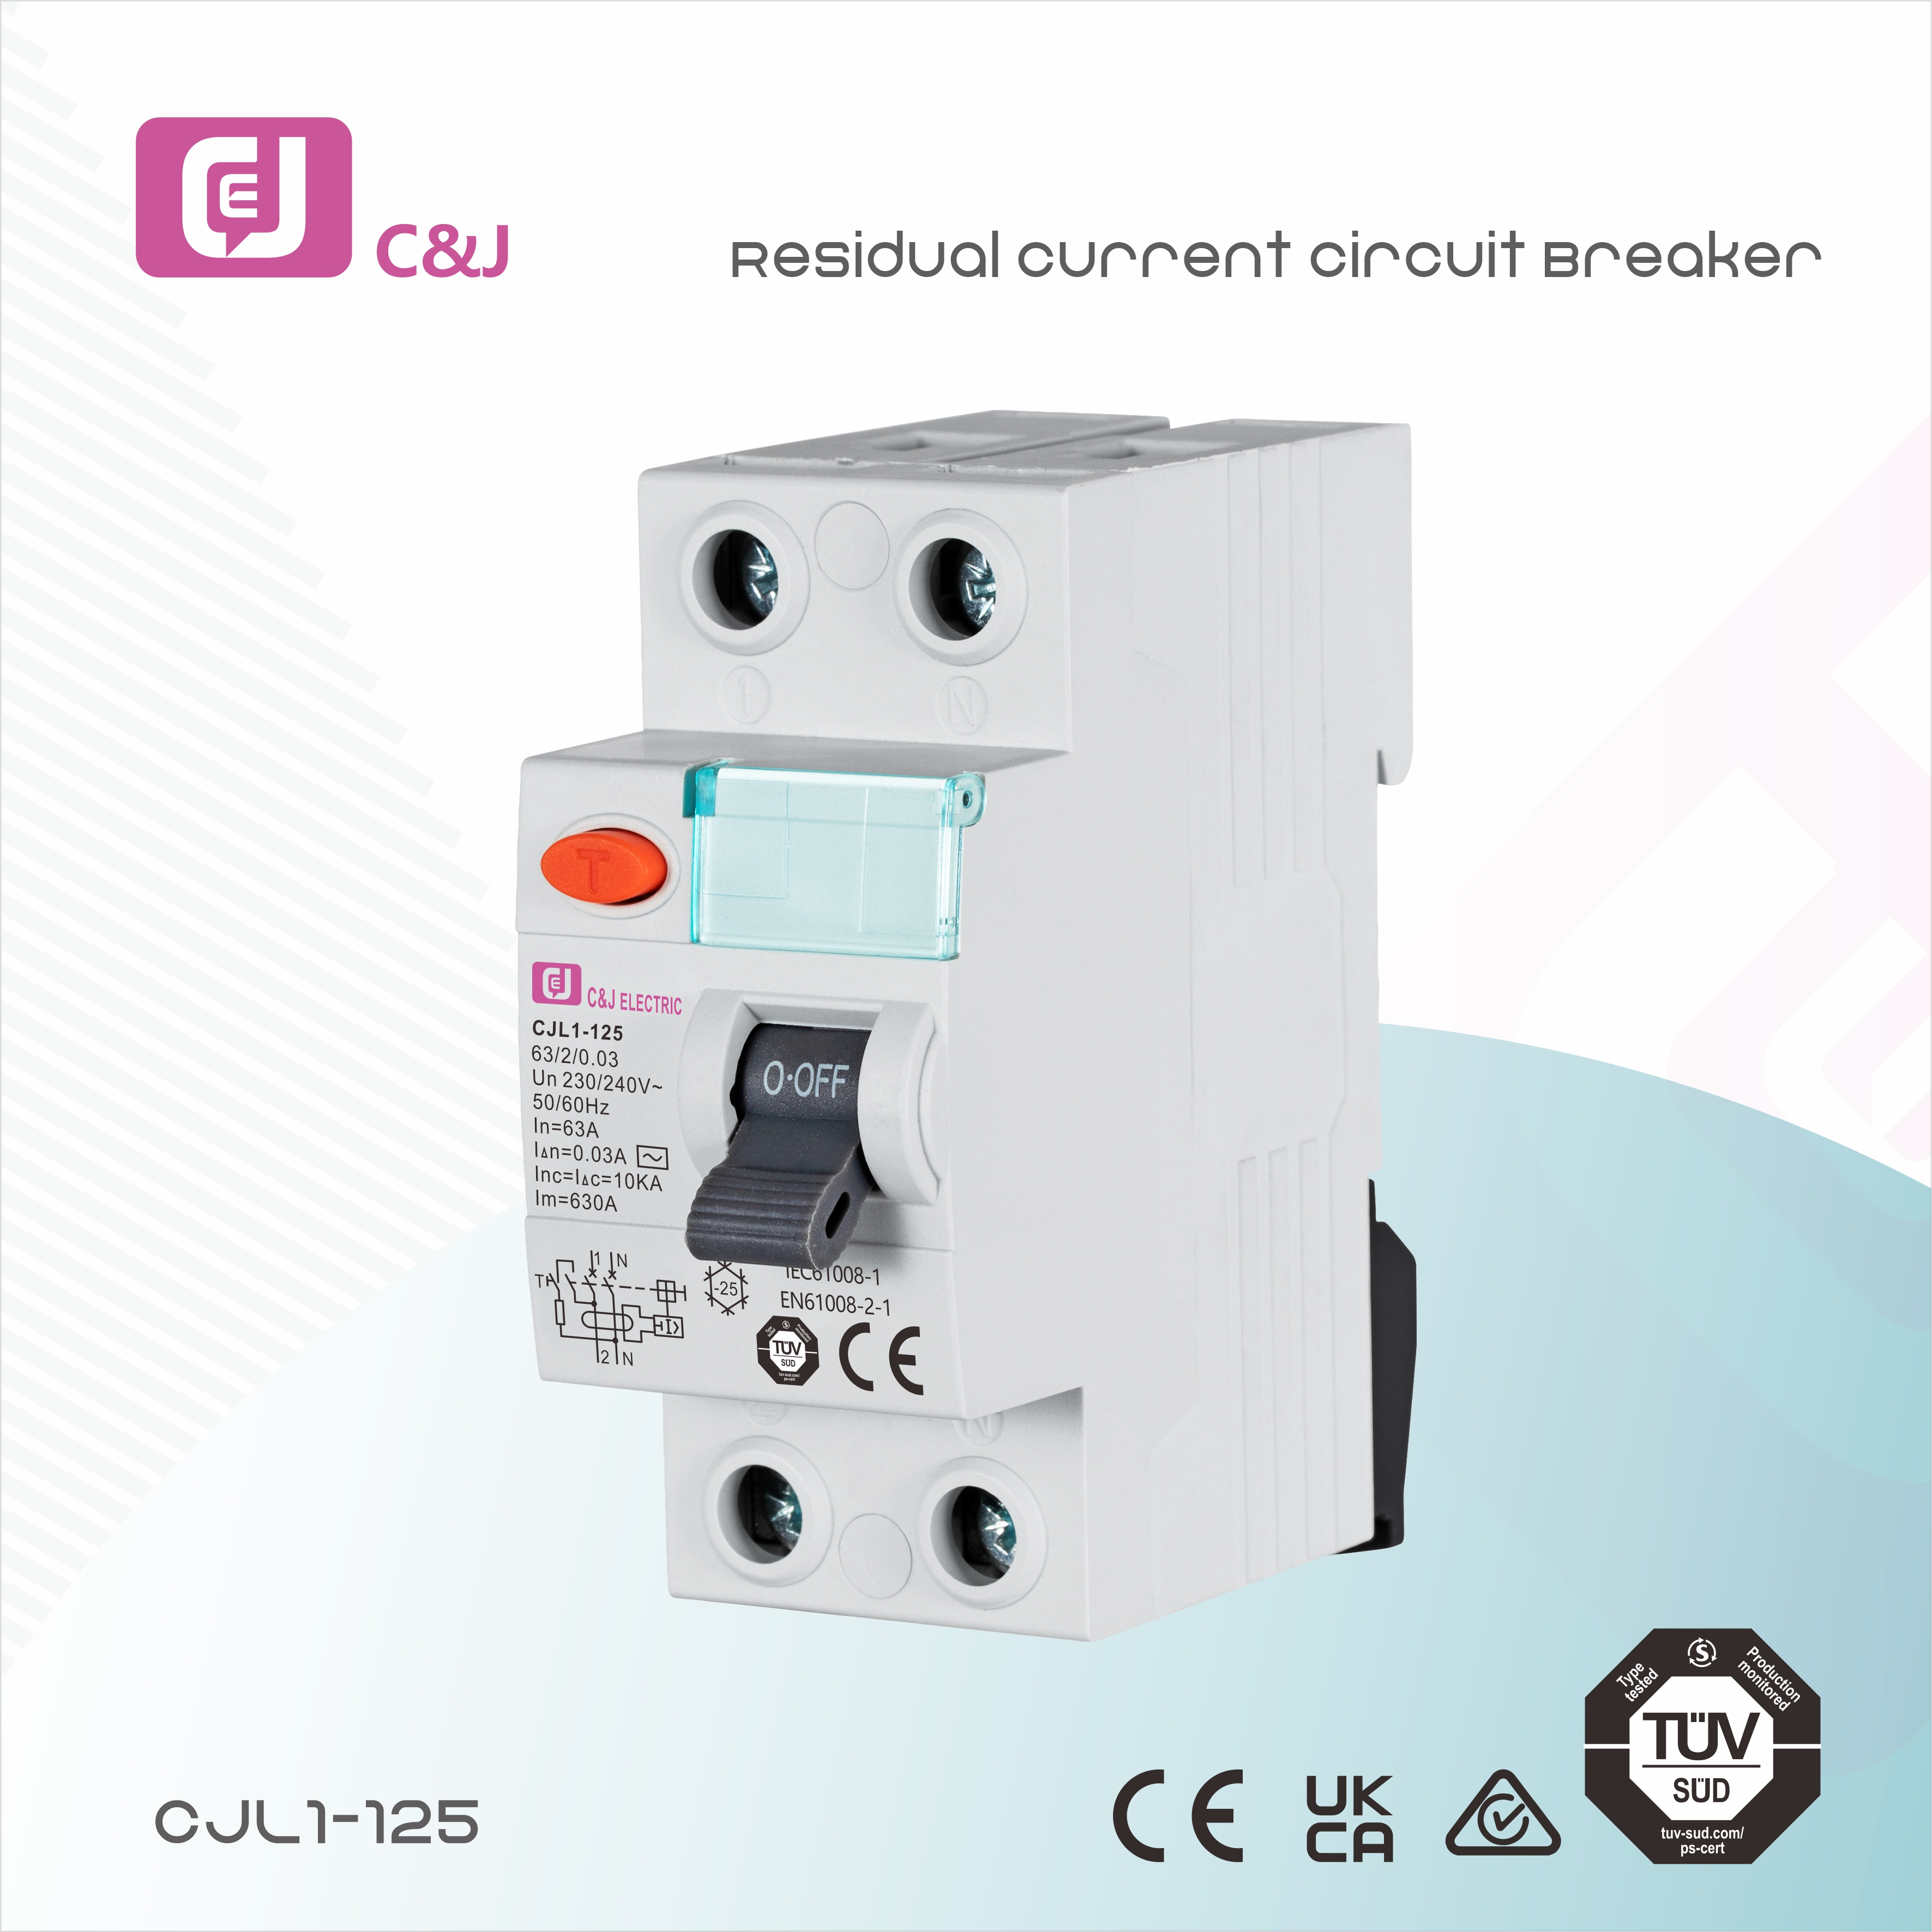 Leakage circuit breaker: ensure the safety of electricity